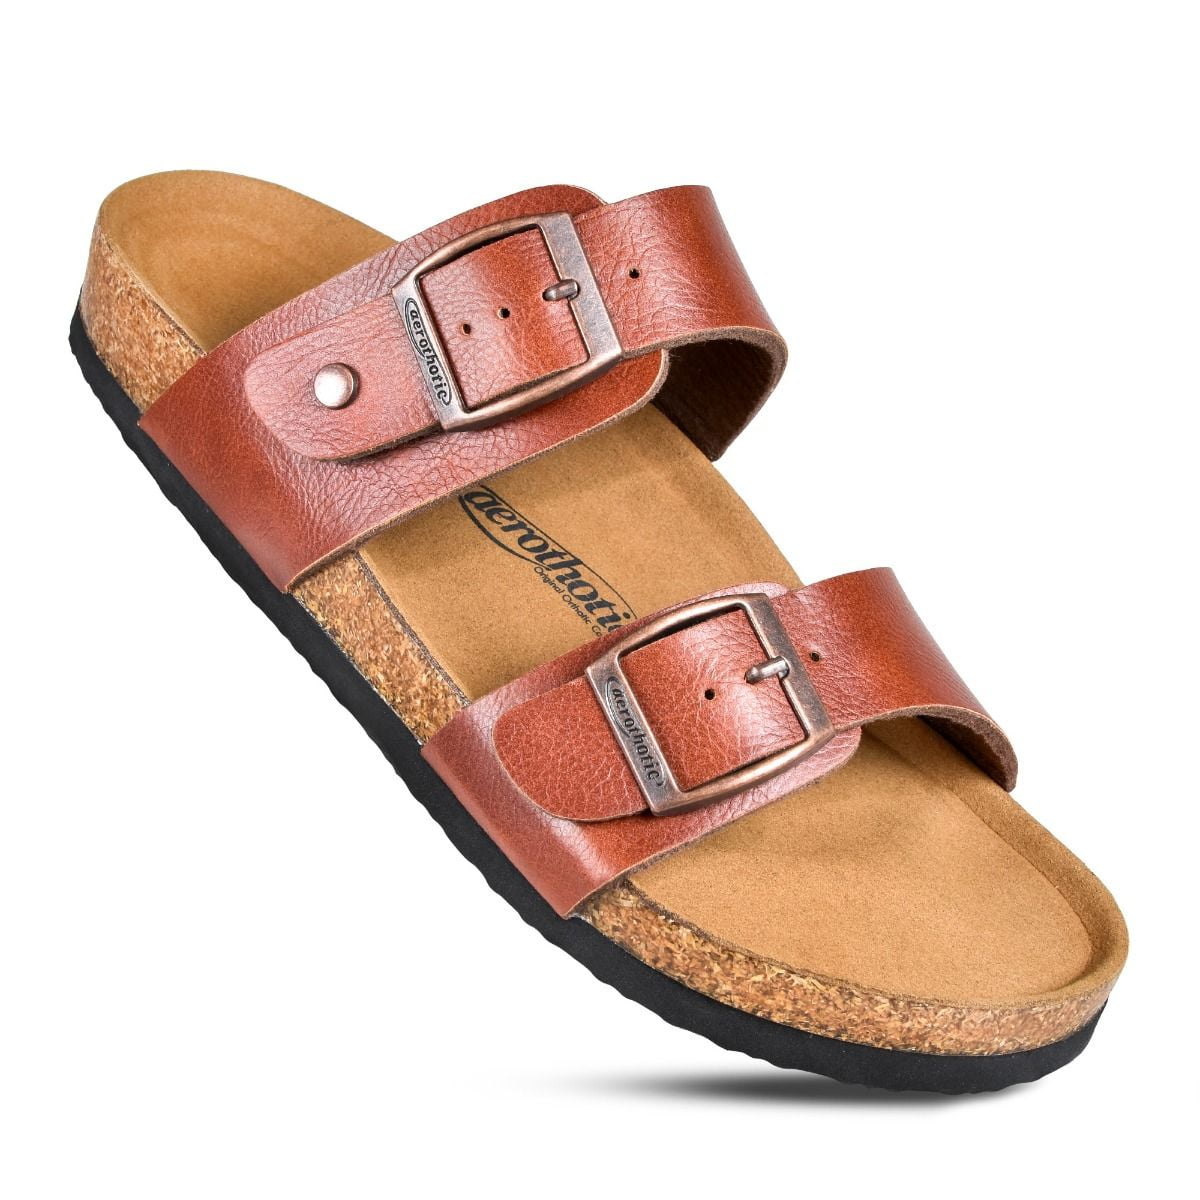 XDASG Women's footbed Sandal with Women's Cork Footbed Sandal Slip On,  Double Buckle Slide Sandals with +Comfort Arch Support - Walmart.com